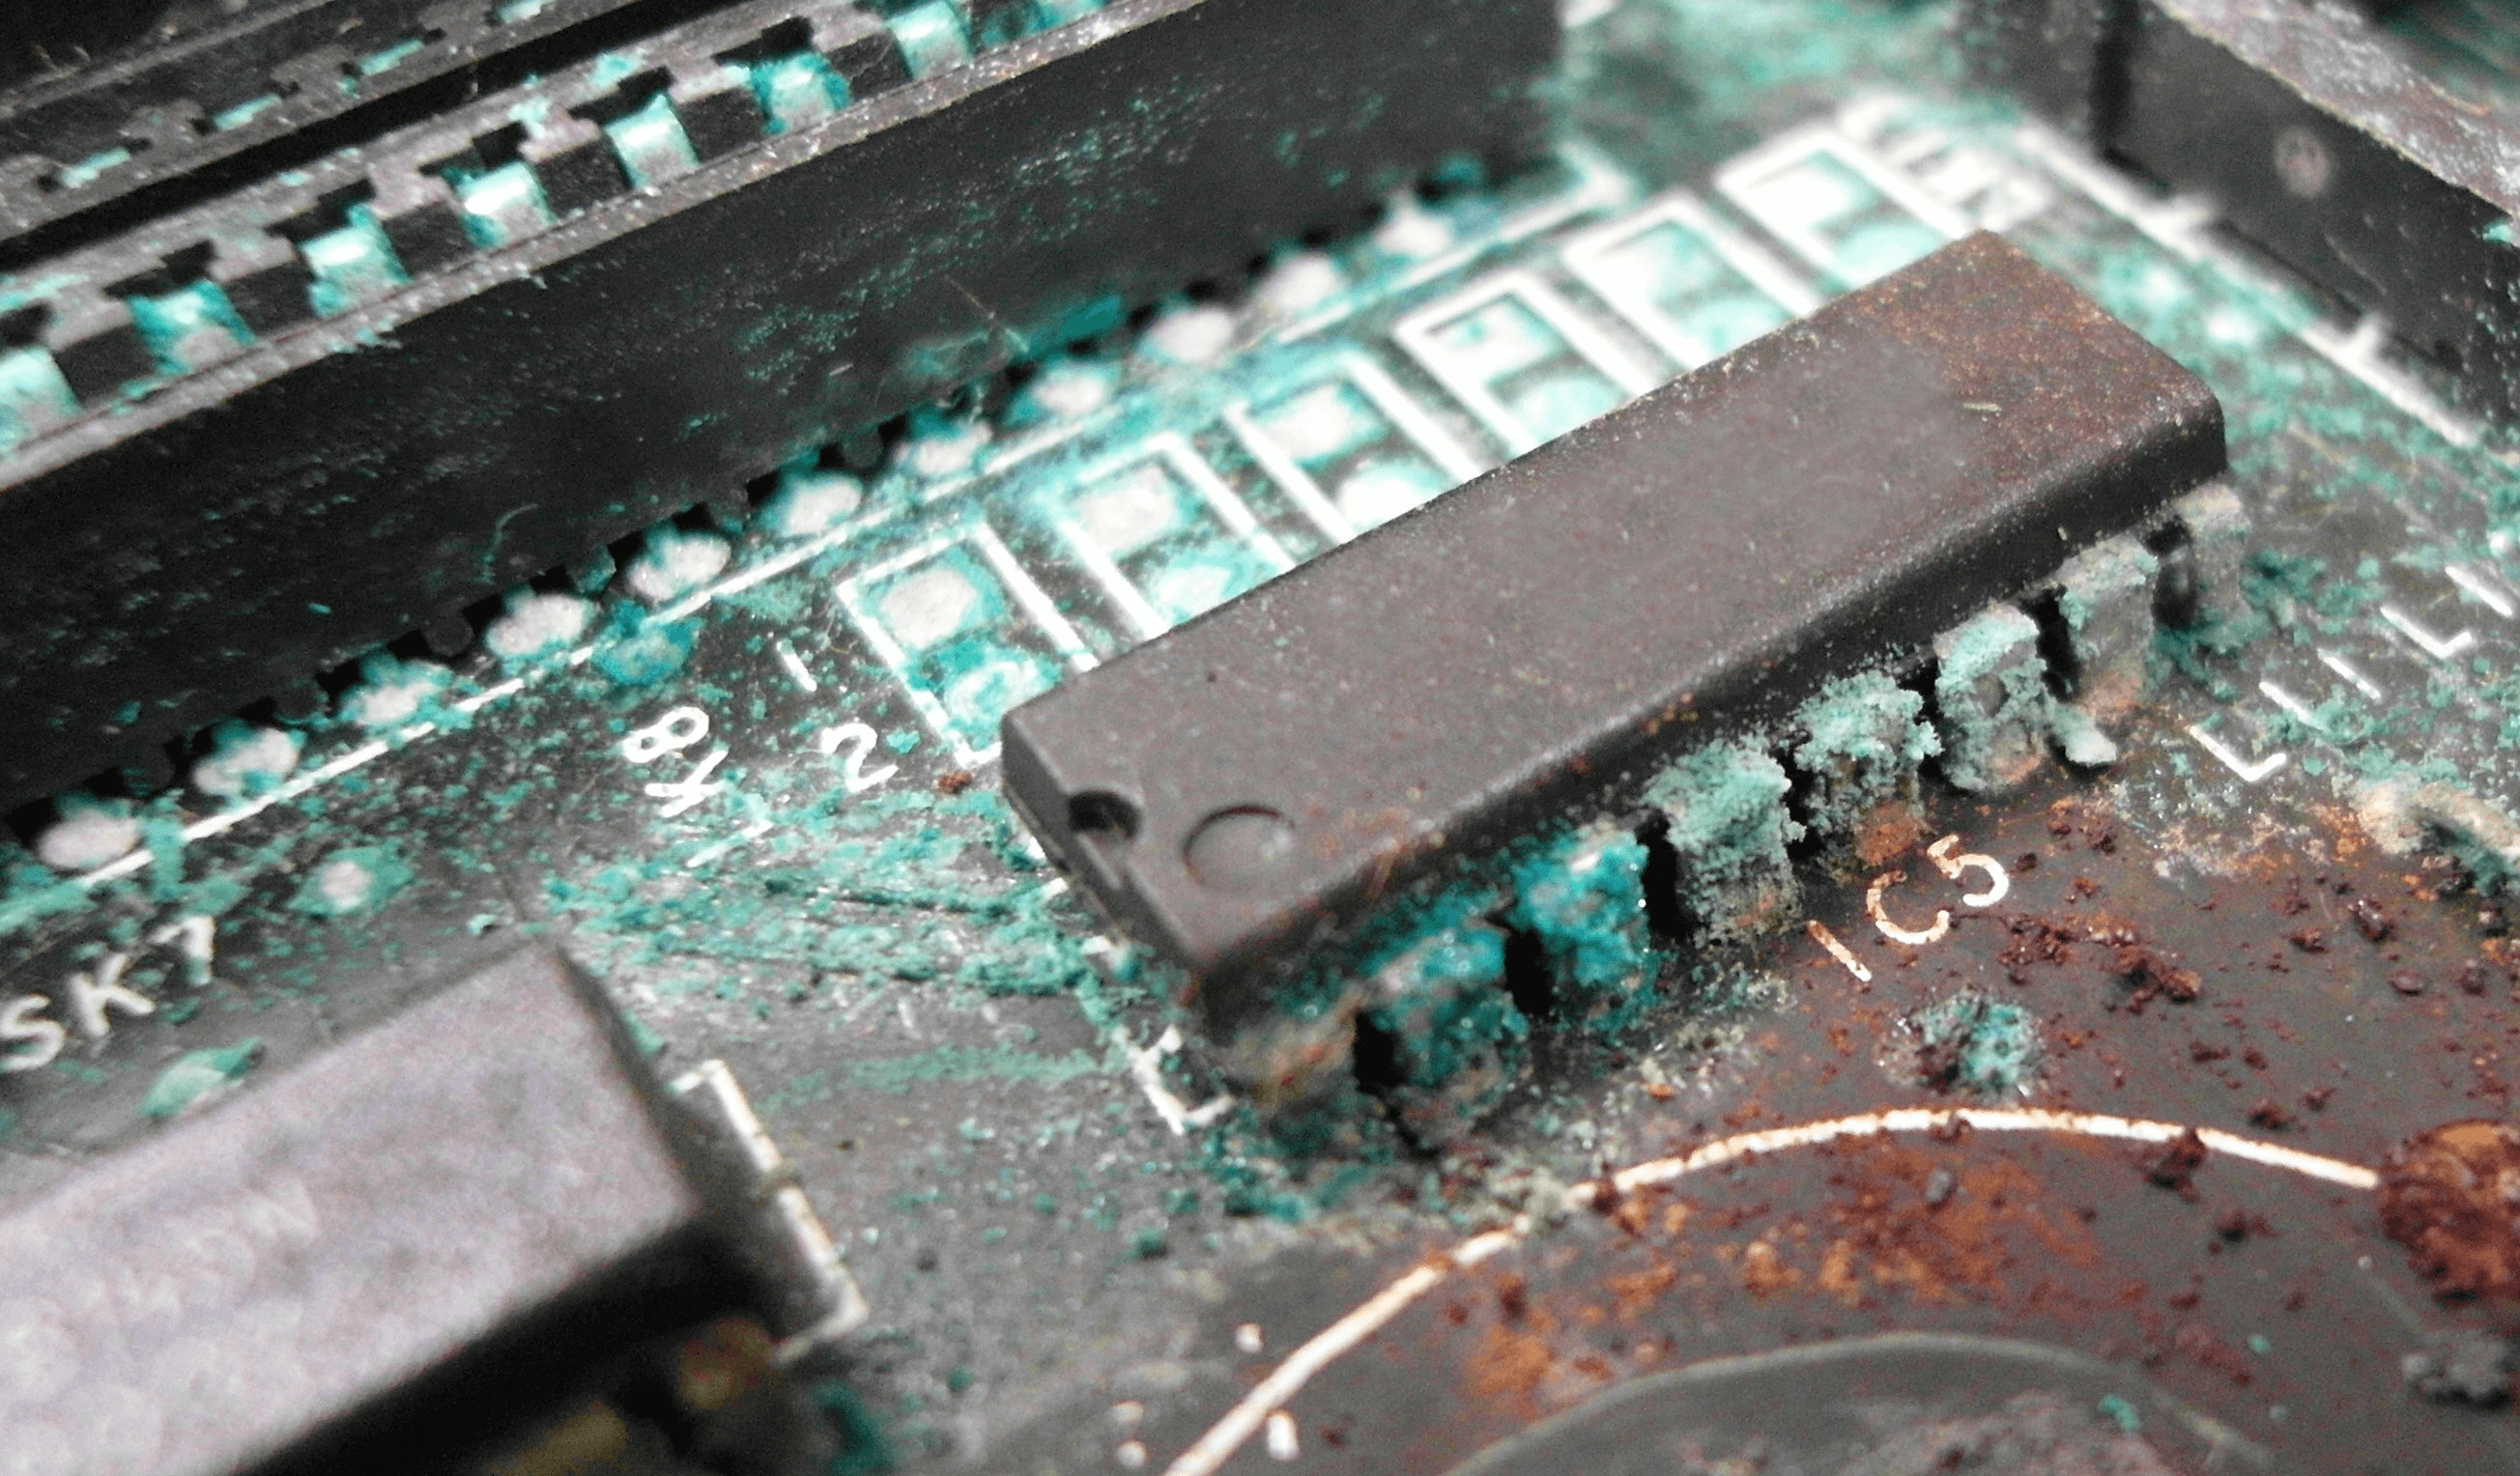 PCB suffering from corrosion